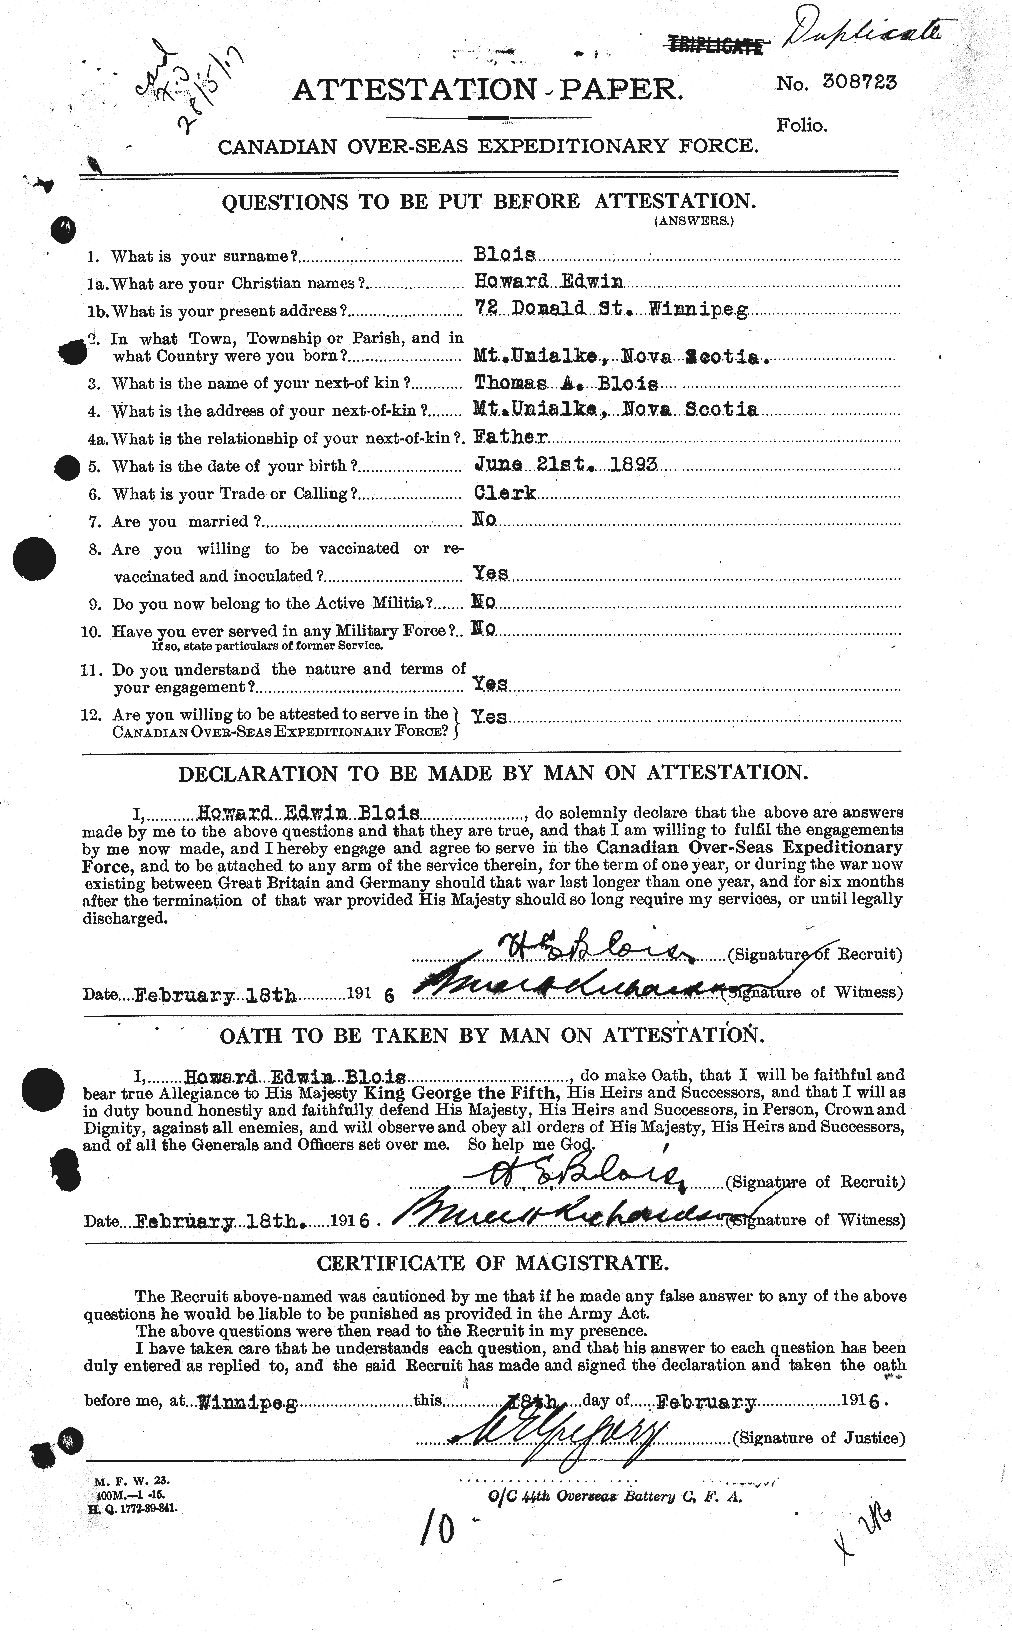 Personnel Records of the First World War - CEF 248452a